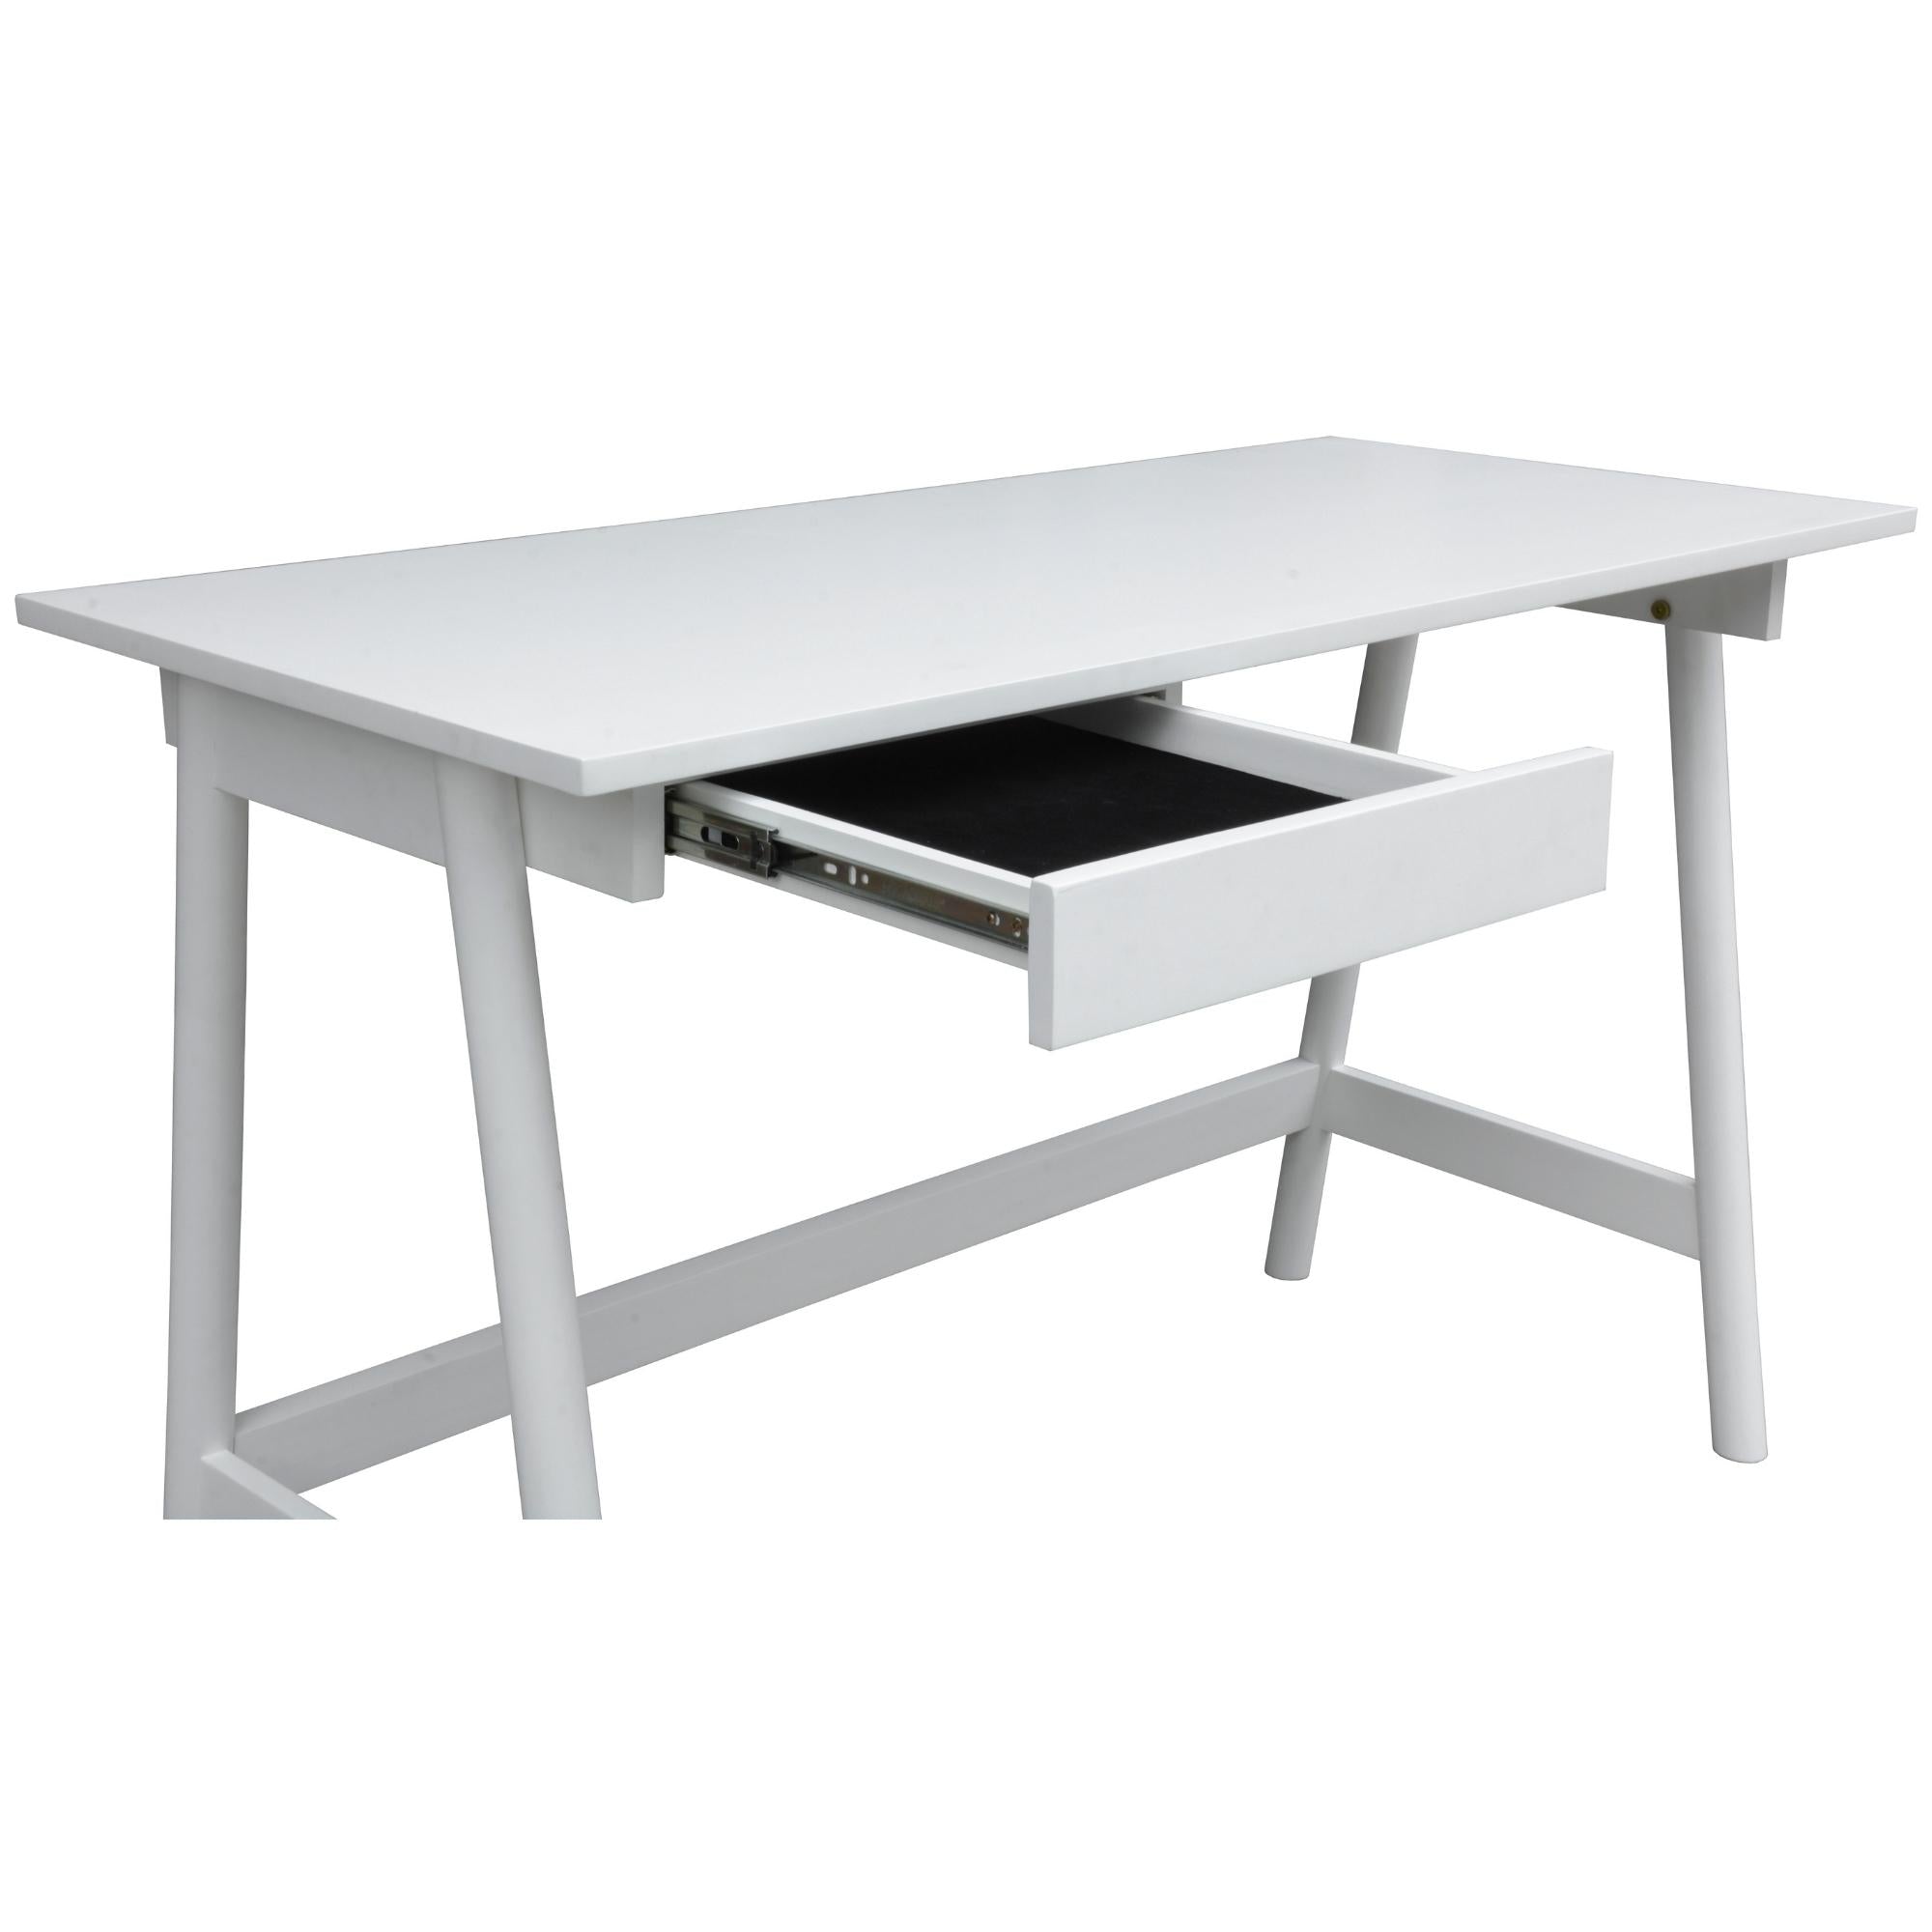 Mindil Office Desk Student Study Table Solid Wooden Timber Frame - White Deals499